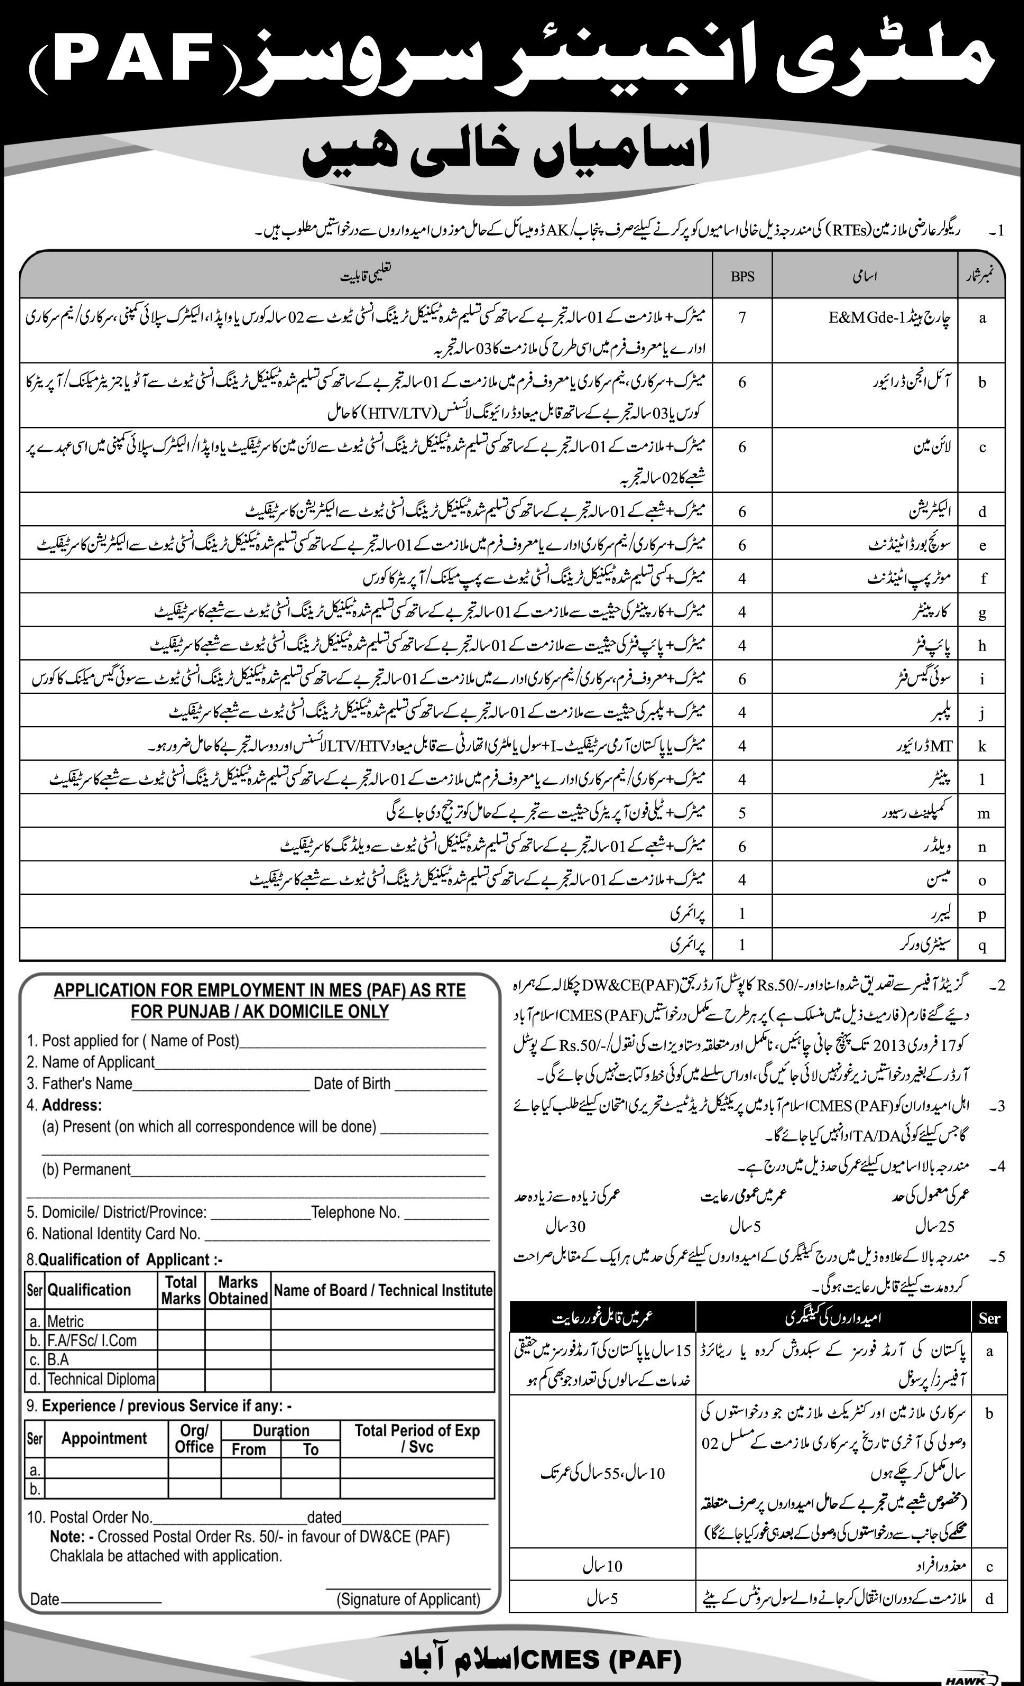 Military Engineer Services PAF Jobs 2013 Application Form & Latest Ad